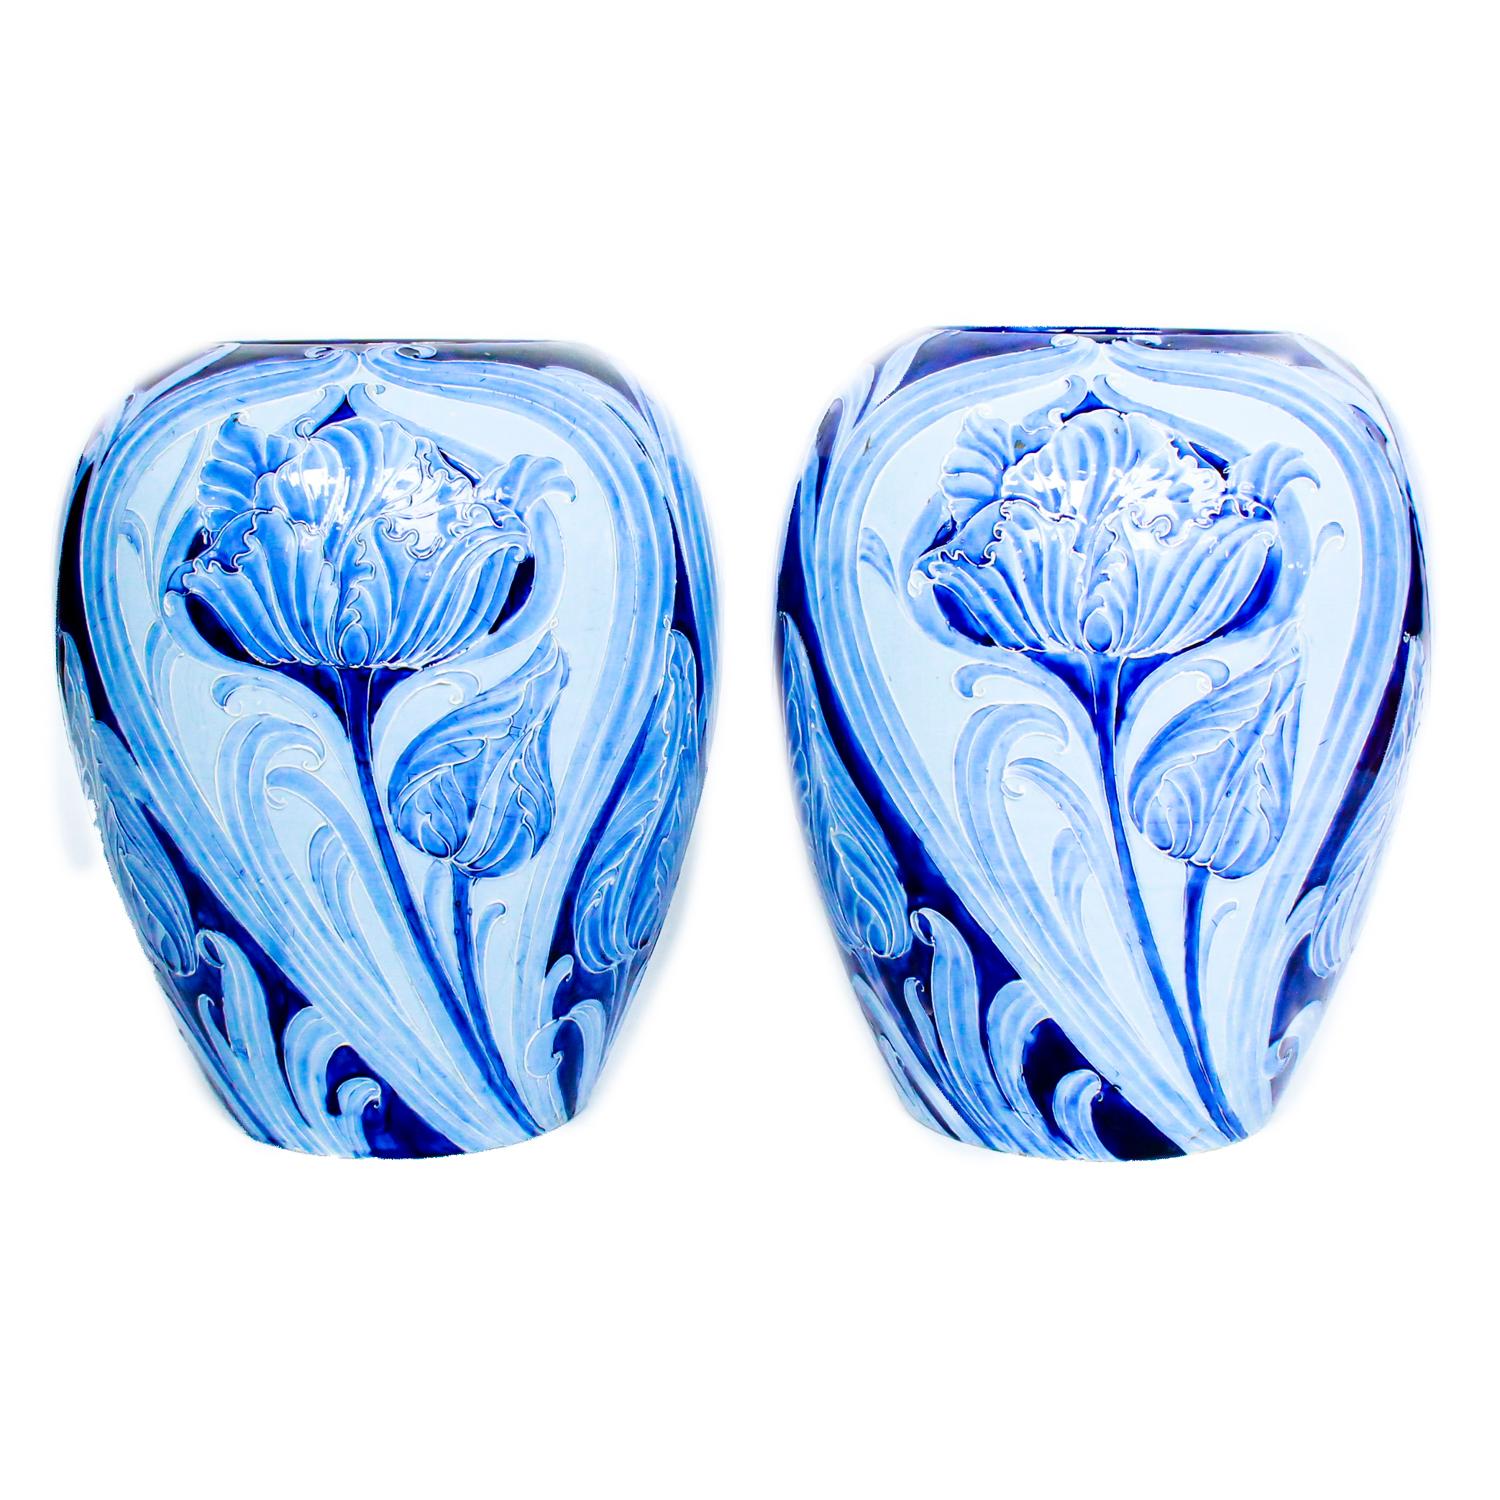 A large pair of early Moorcroft Florian ware Tulip pattern vases, decorated in shades of blue. Painted Florian mark to base.

Literature: A similar pair of vases illustrated in Moorcroft (1897-1993) New Edition, by Paul Atterbury. p.149. pl.1

